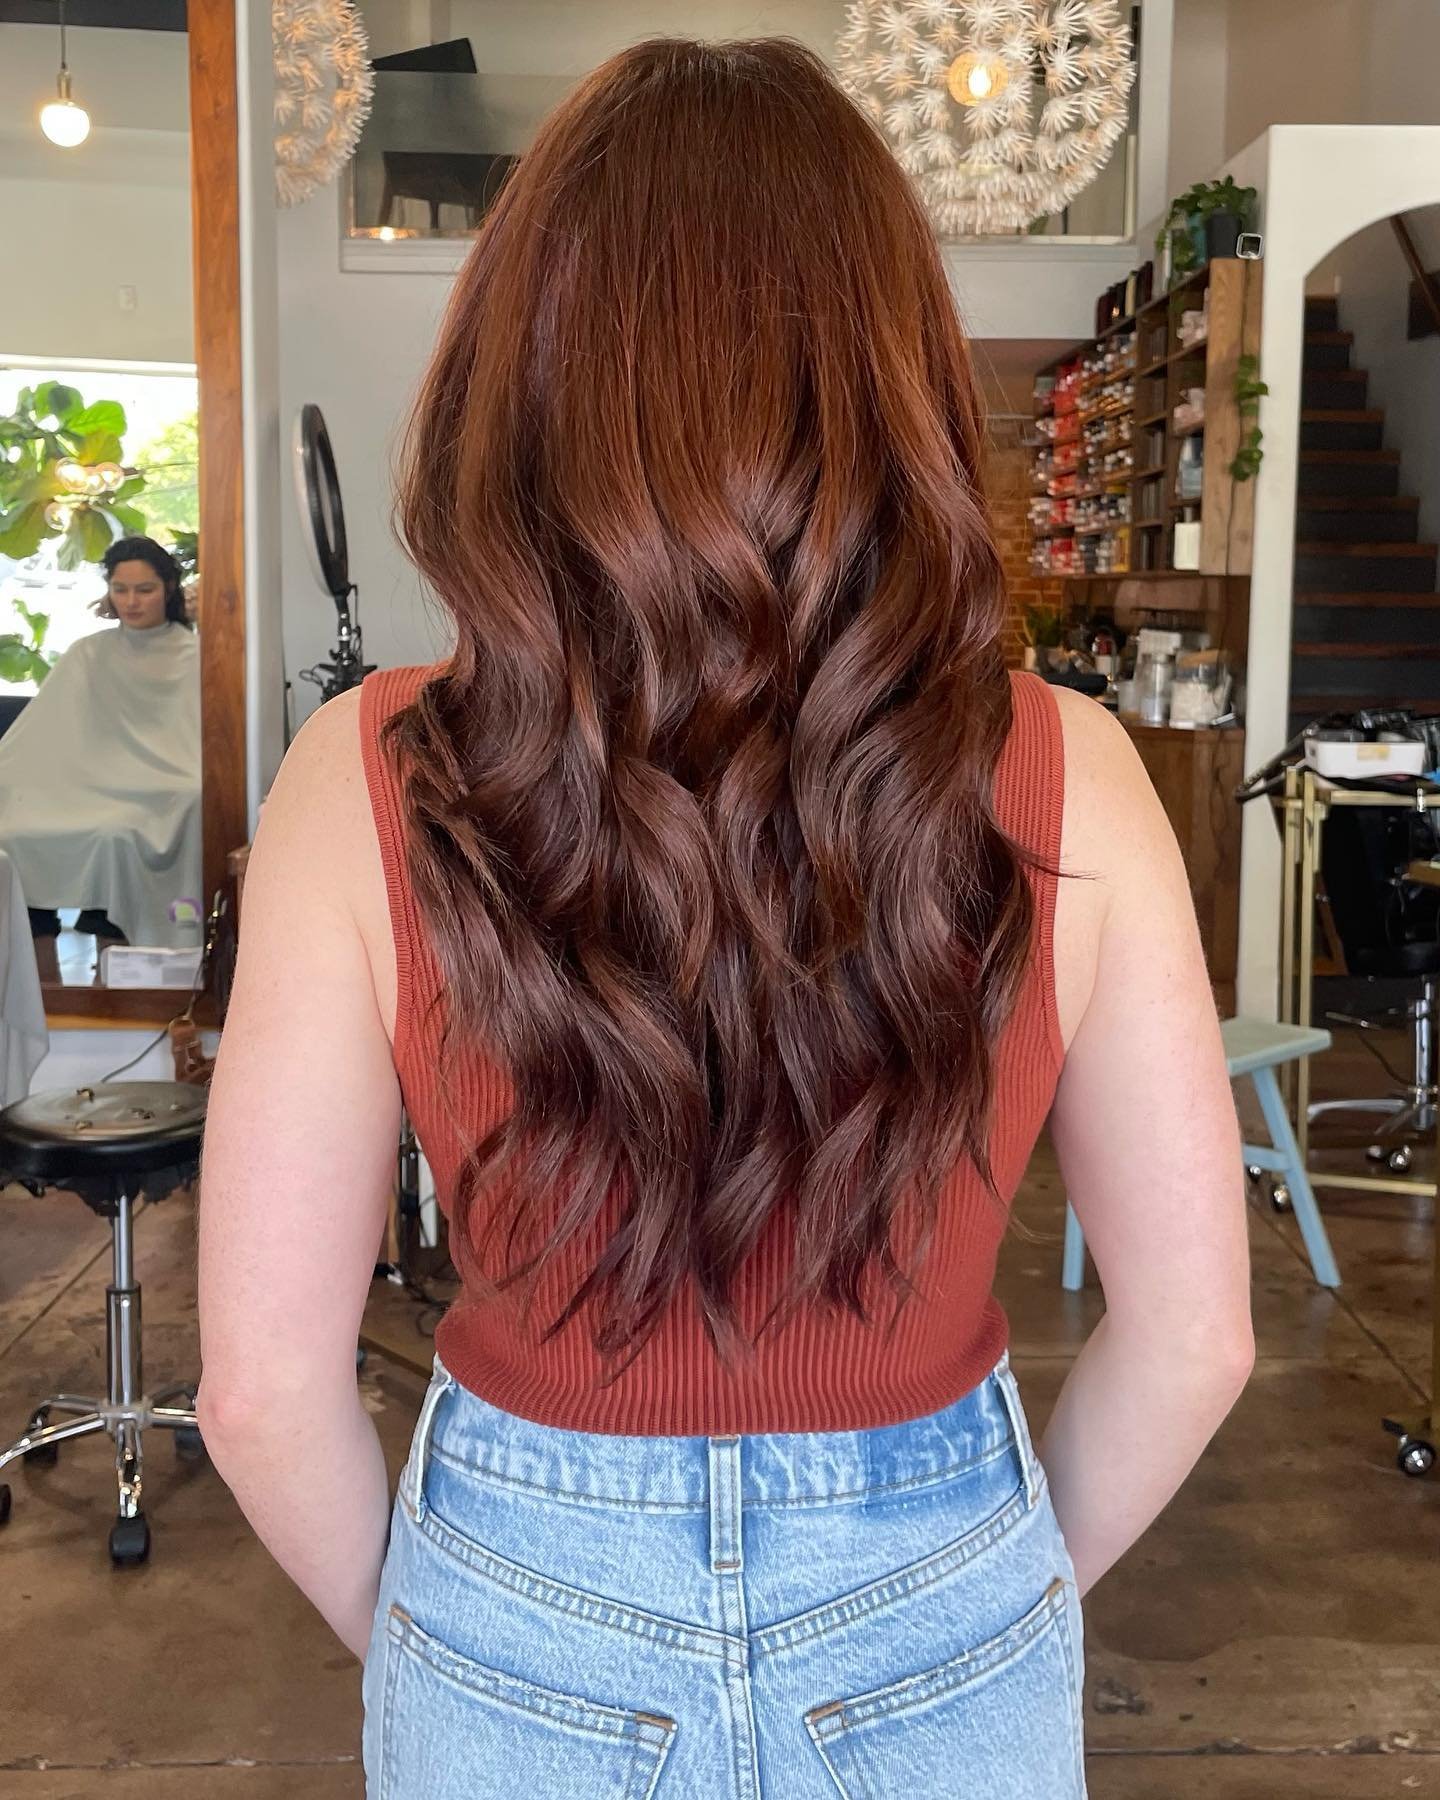 Do you want fuller, healthier looking hair? Pair our 2.5 hour @vegetalement color service with your desired length of @bellamihairpro extensions. ✂️✨🎀

Stunning client @emilysoninsta ❤️
Hair by @jaimiebransonhair 
#thepowderroomla #hollywoodhairstyl